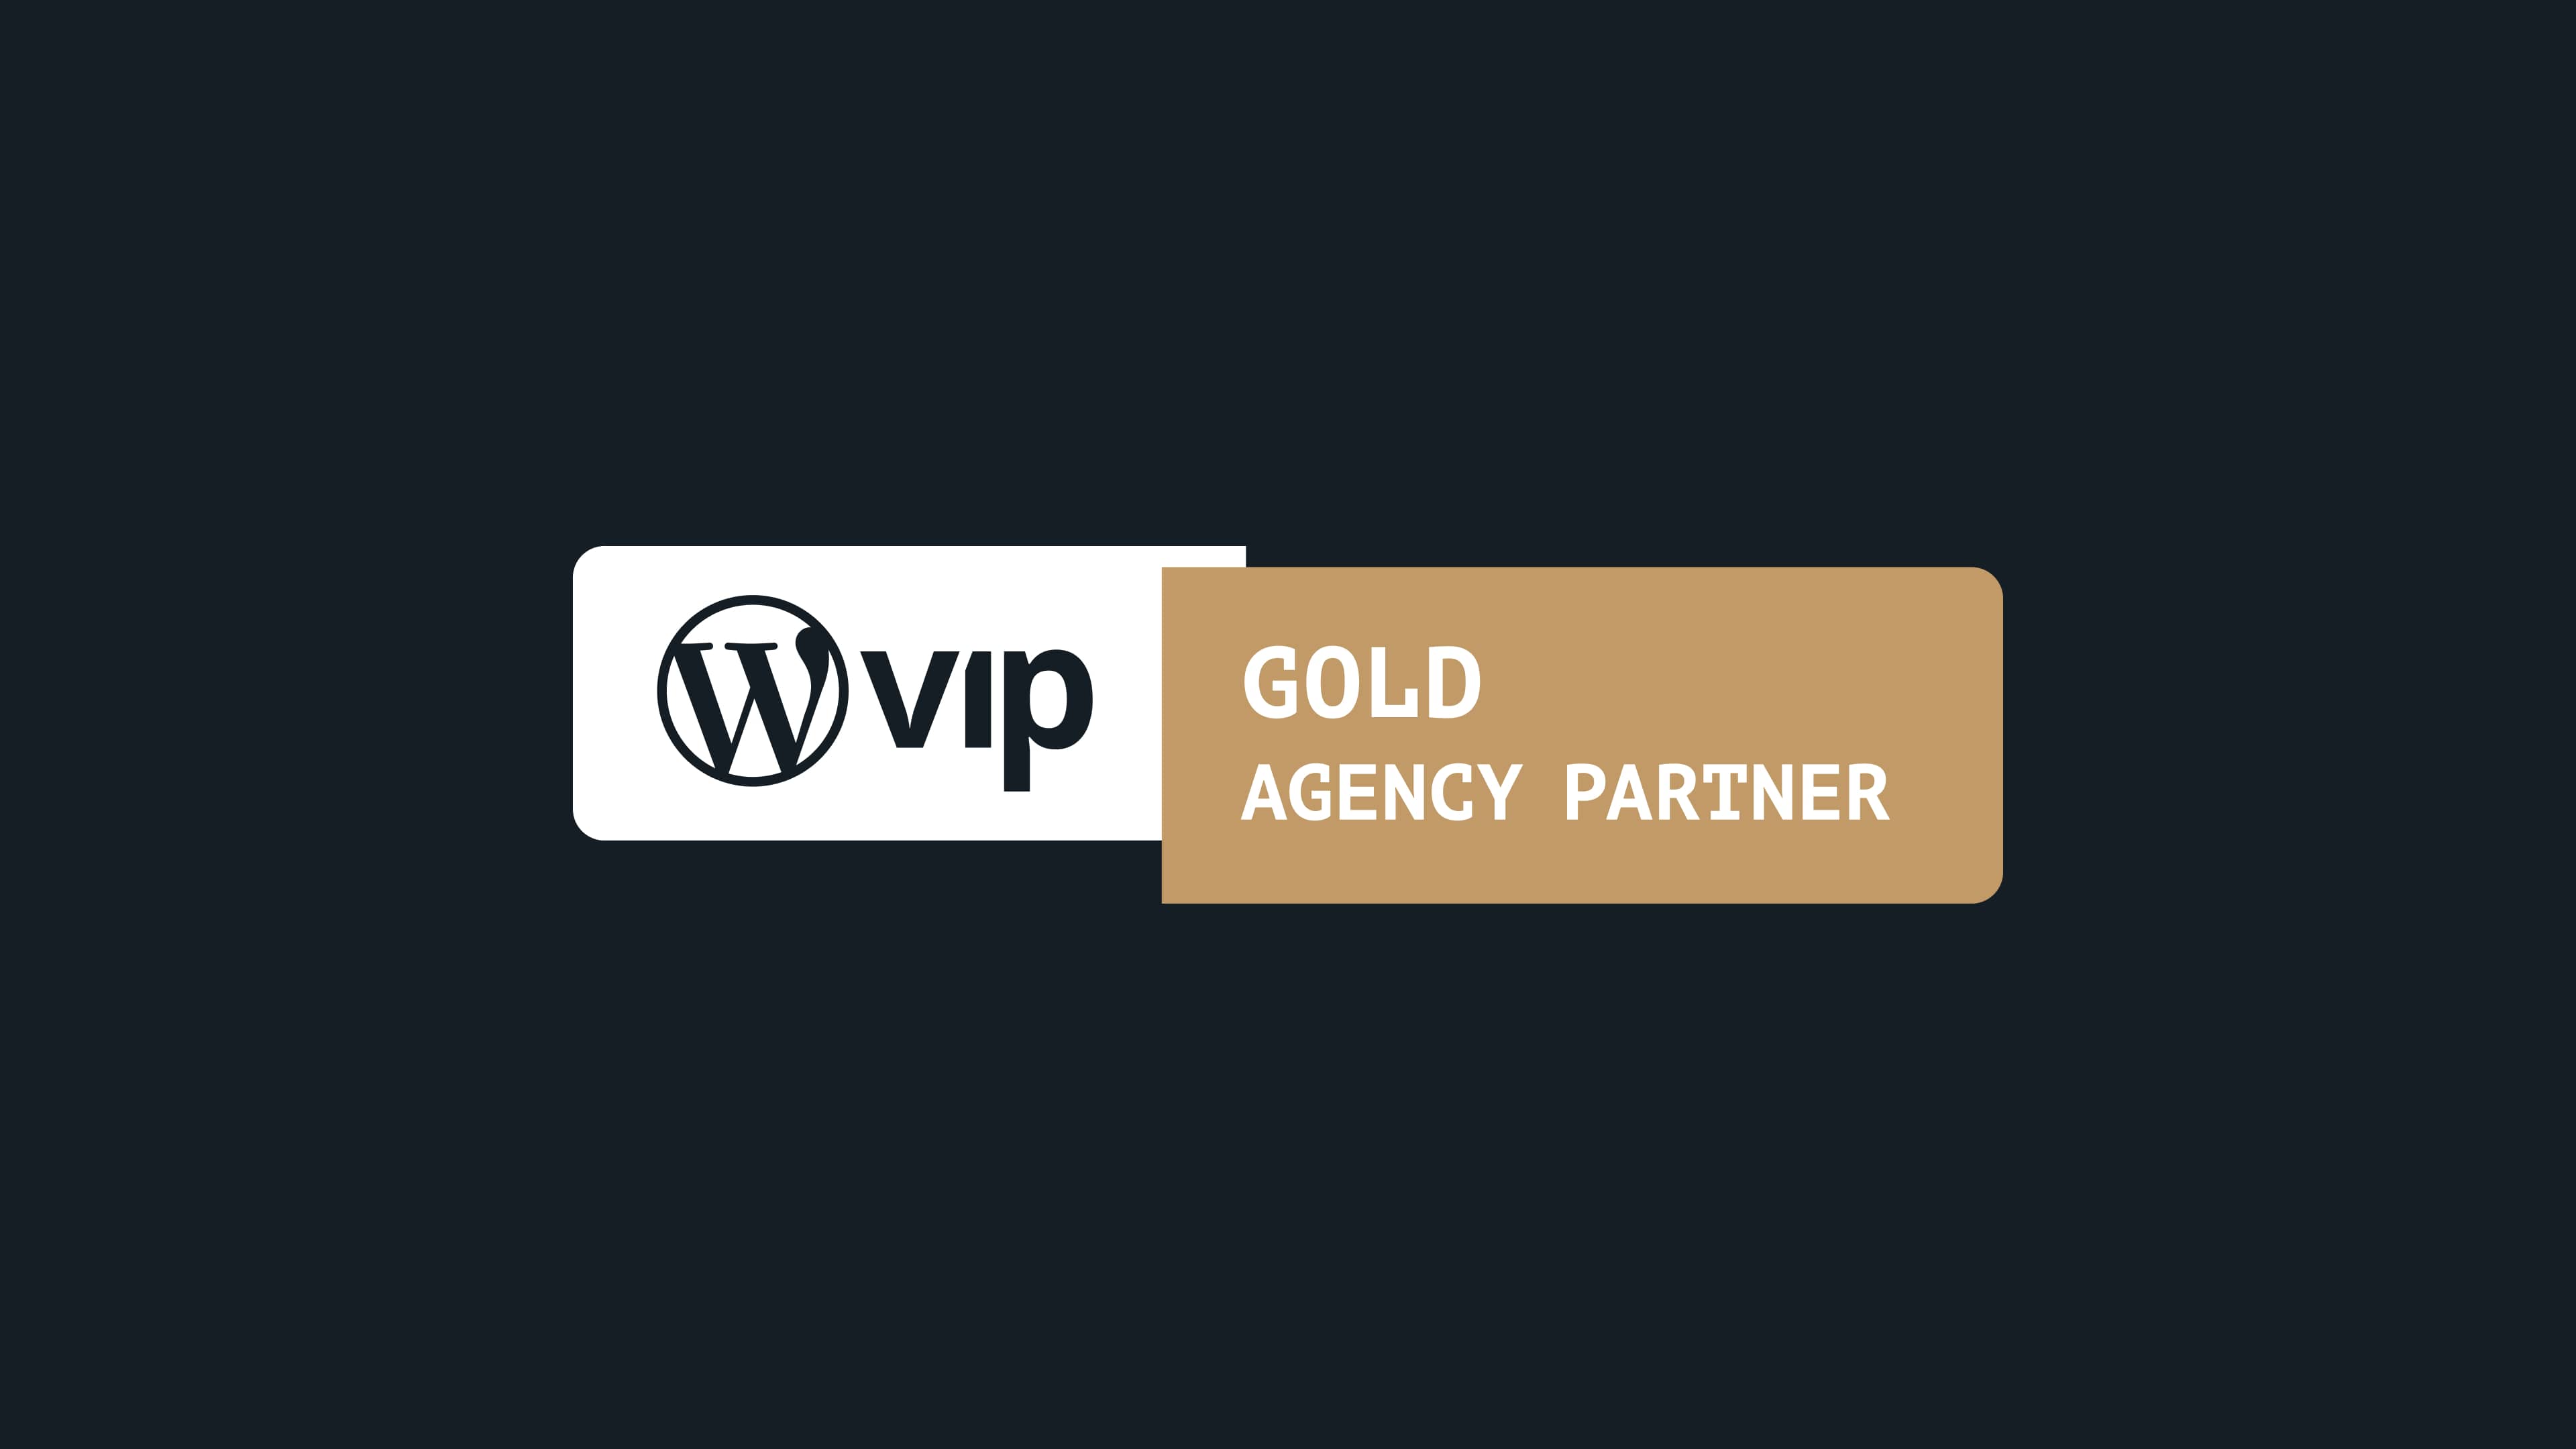 WordPress VIP cements its relationship with Rareview as Gold Agency Partner